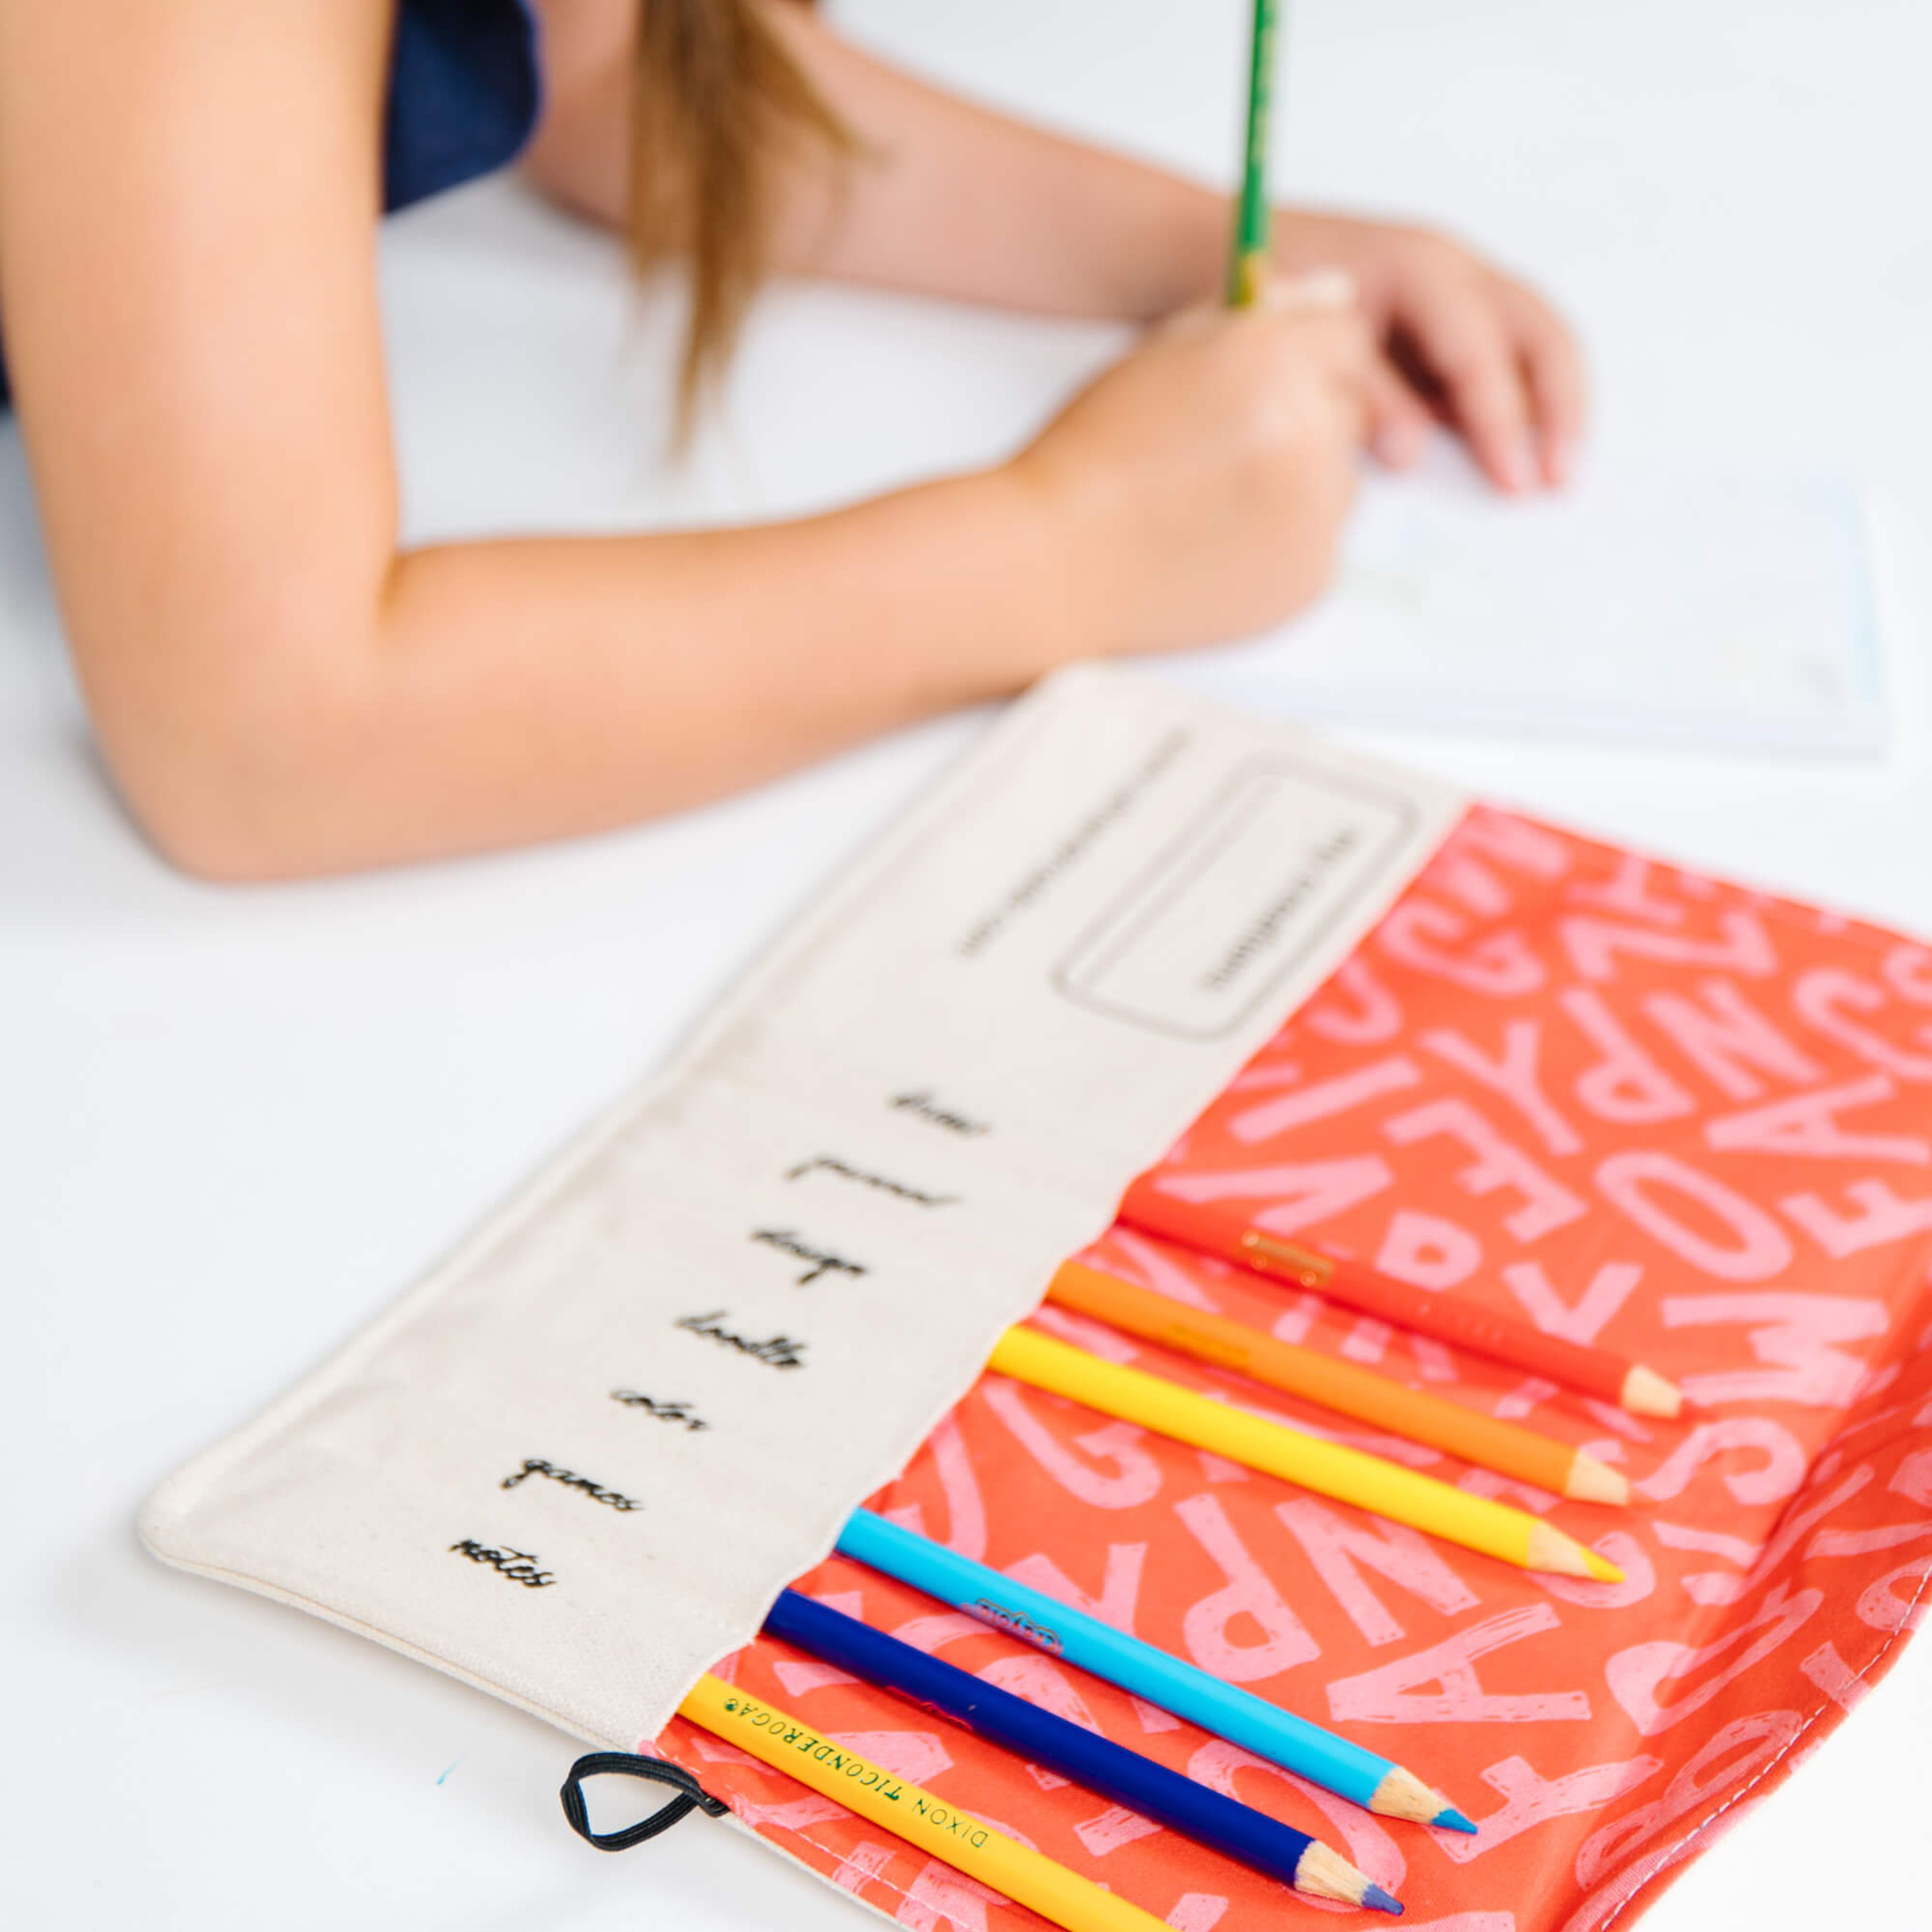 Travel Pencil Case: "My daughter loved it, beautiful design"